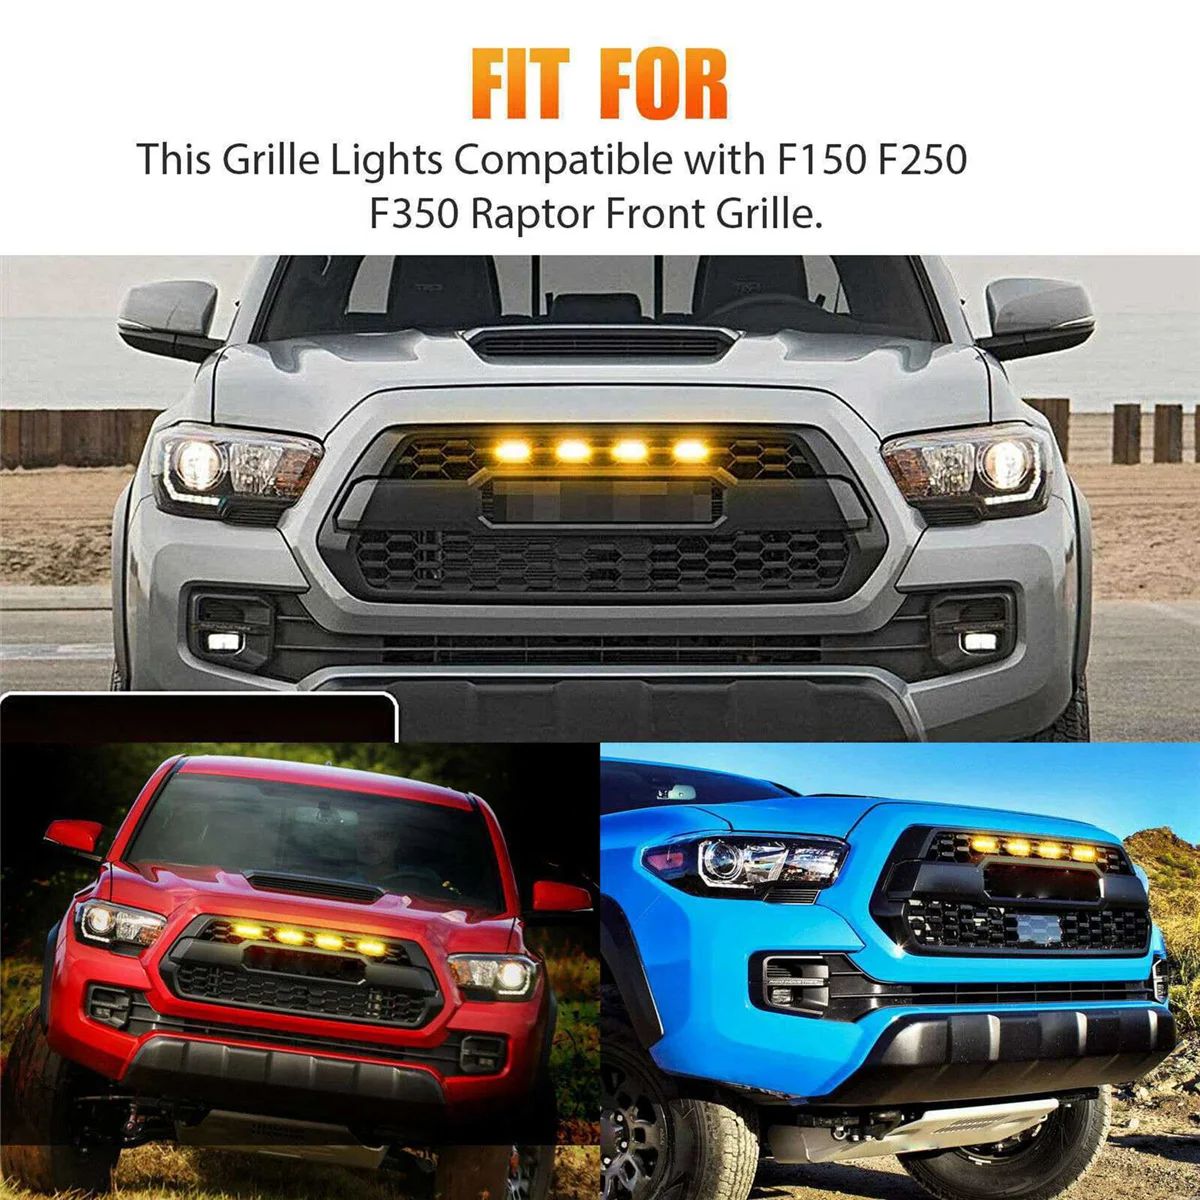 

20X Raptor Style Smoked Lens Amber LED Front Grille Running Lights for Ford F-150 F150 2009-2018